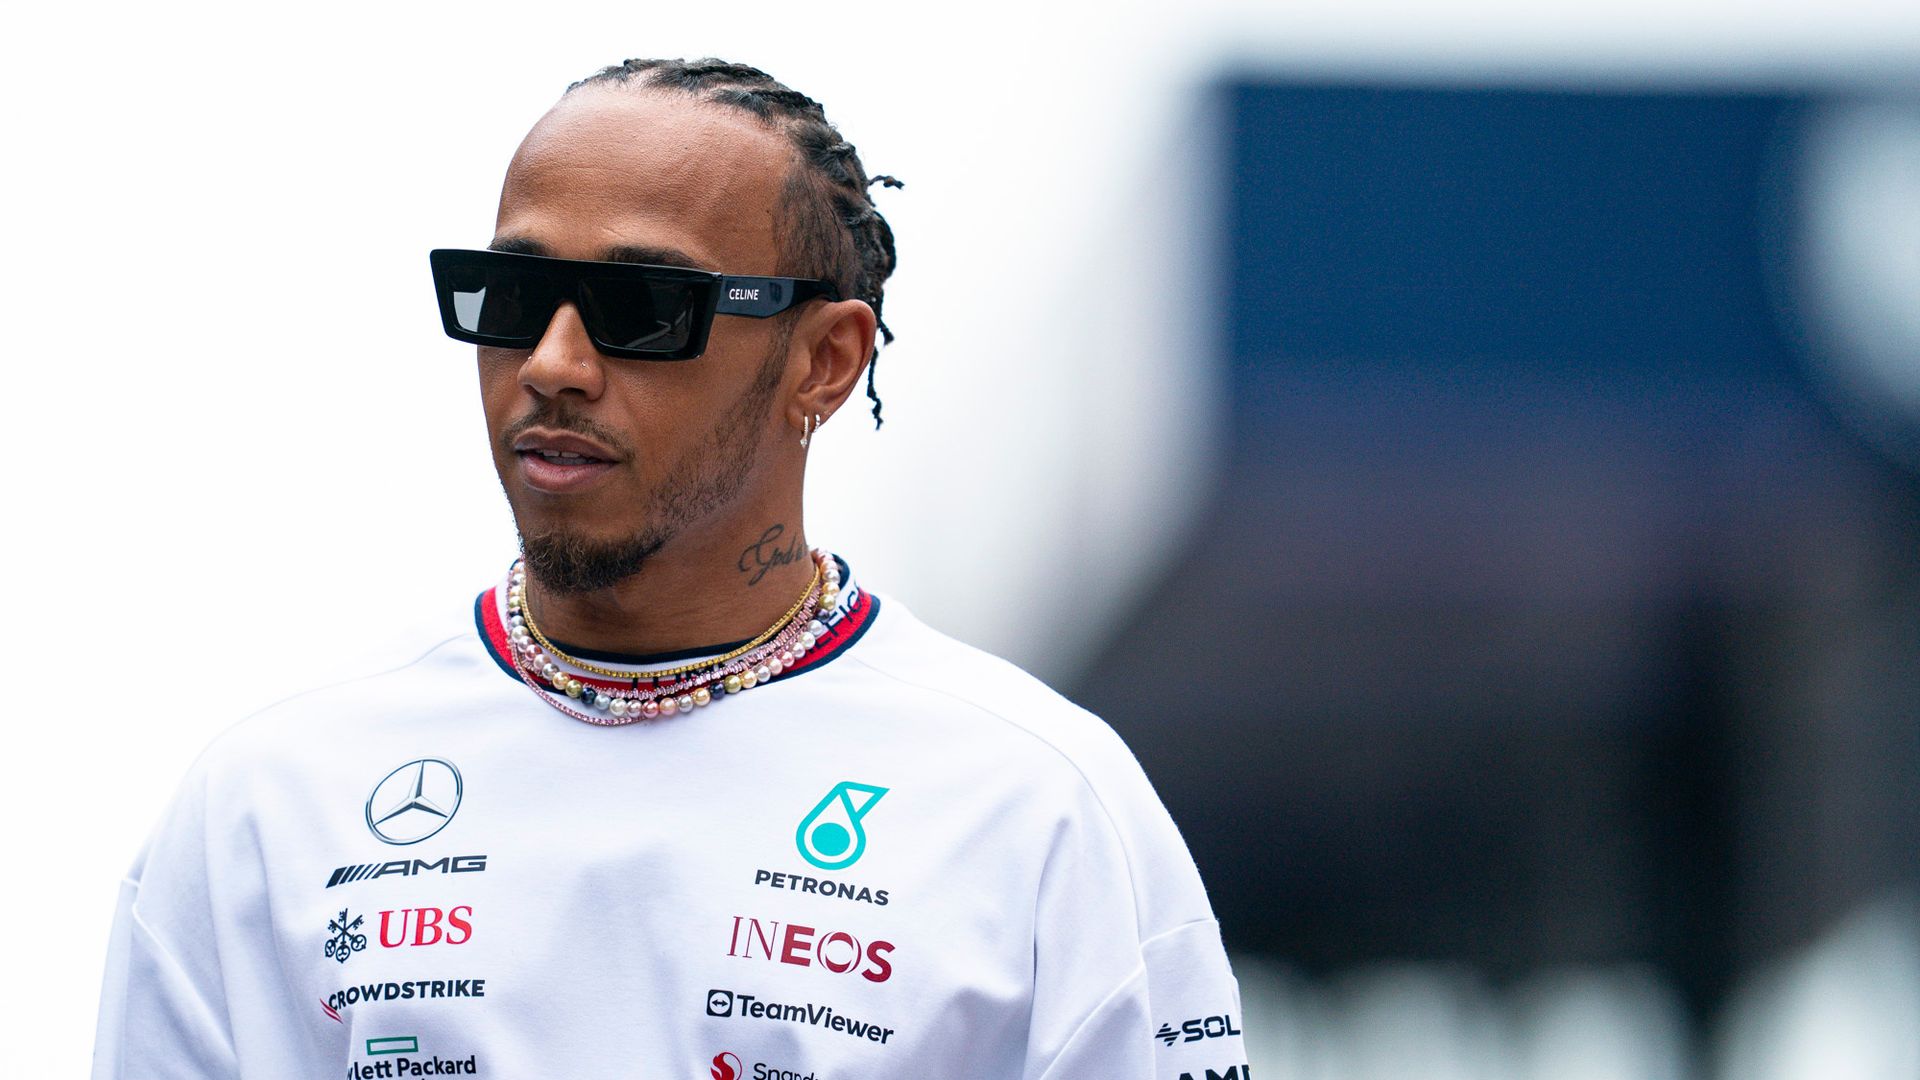 Hamilton still 'incredibly hungry' | Enjoying chasing Verstappen for now